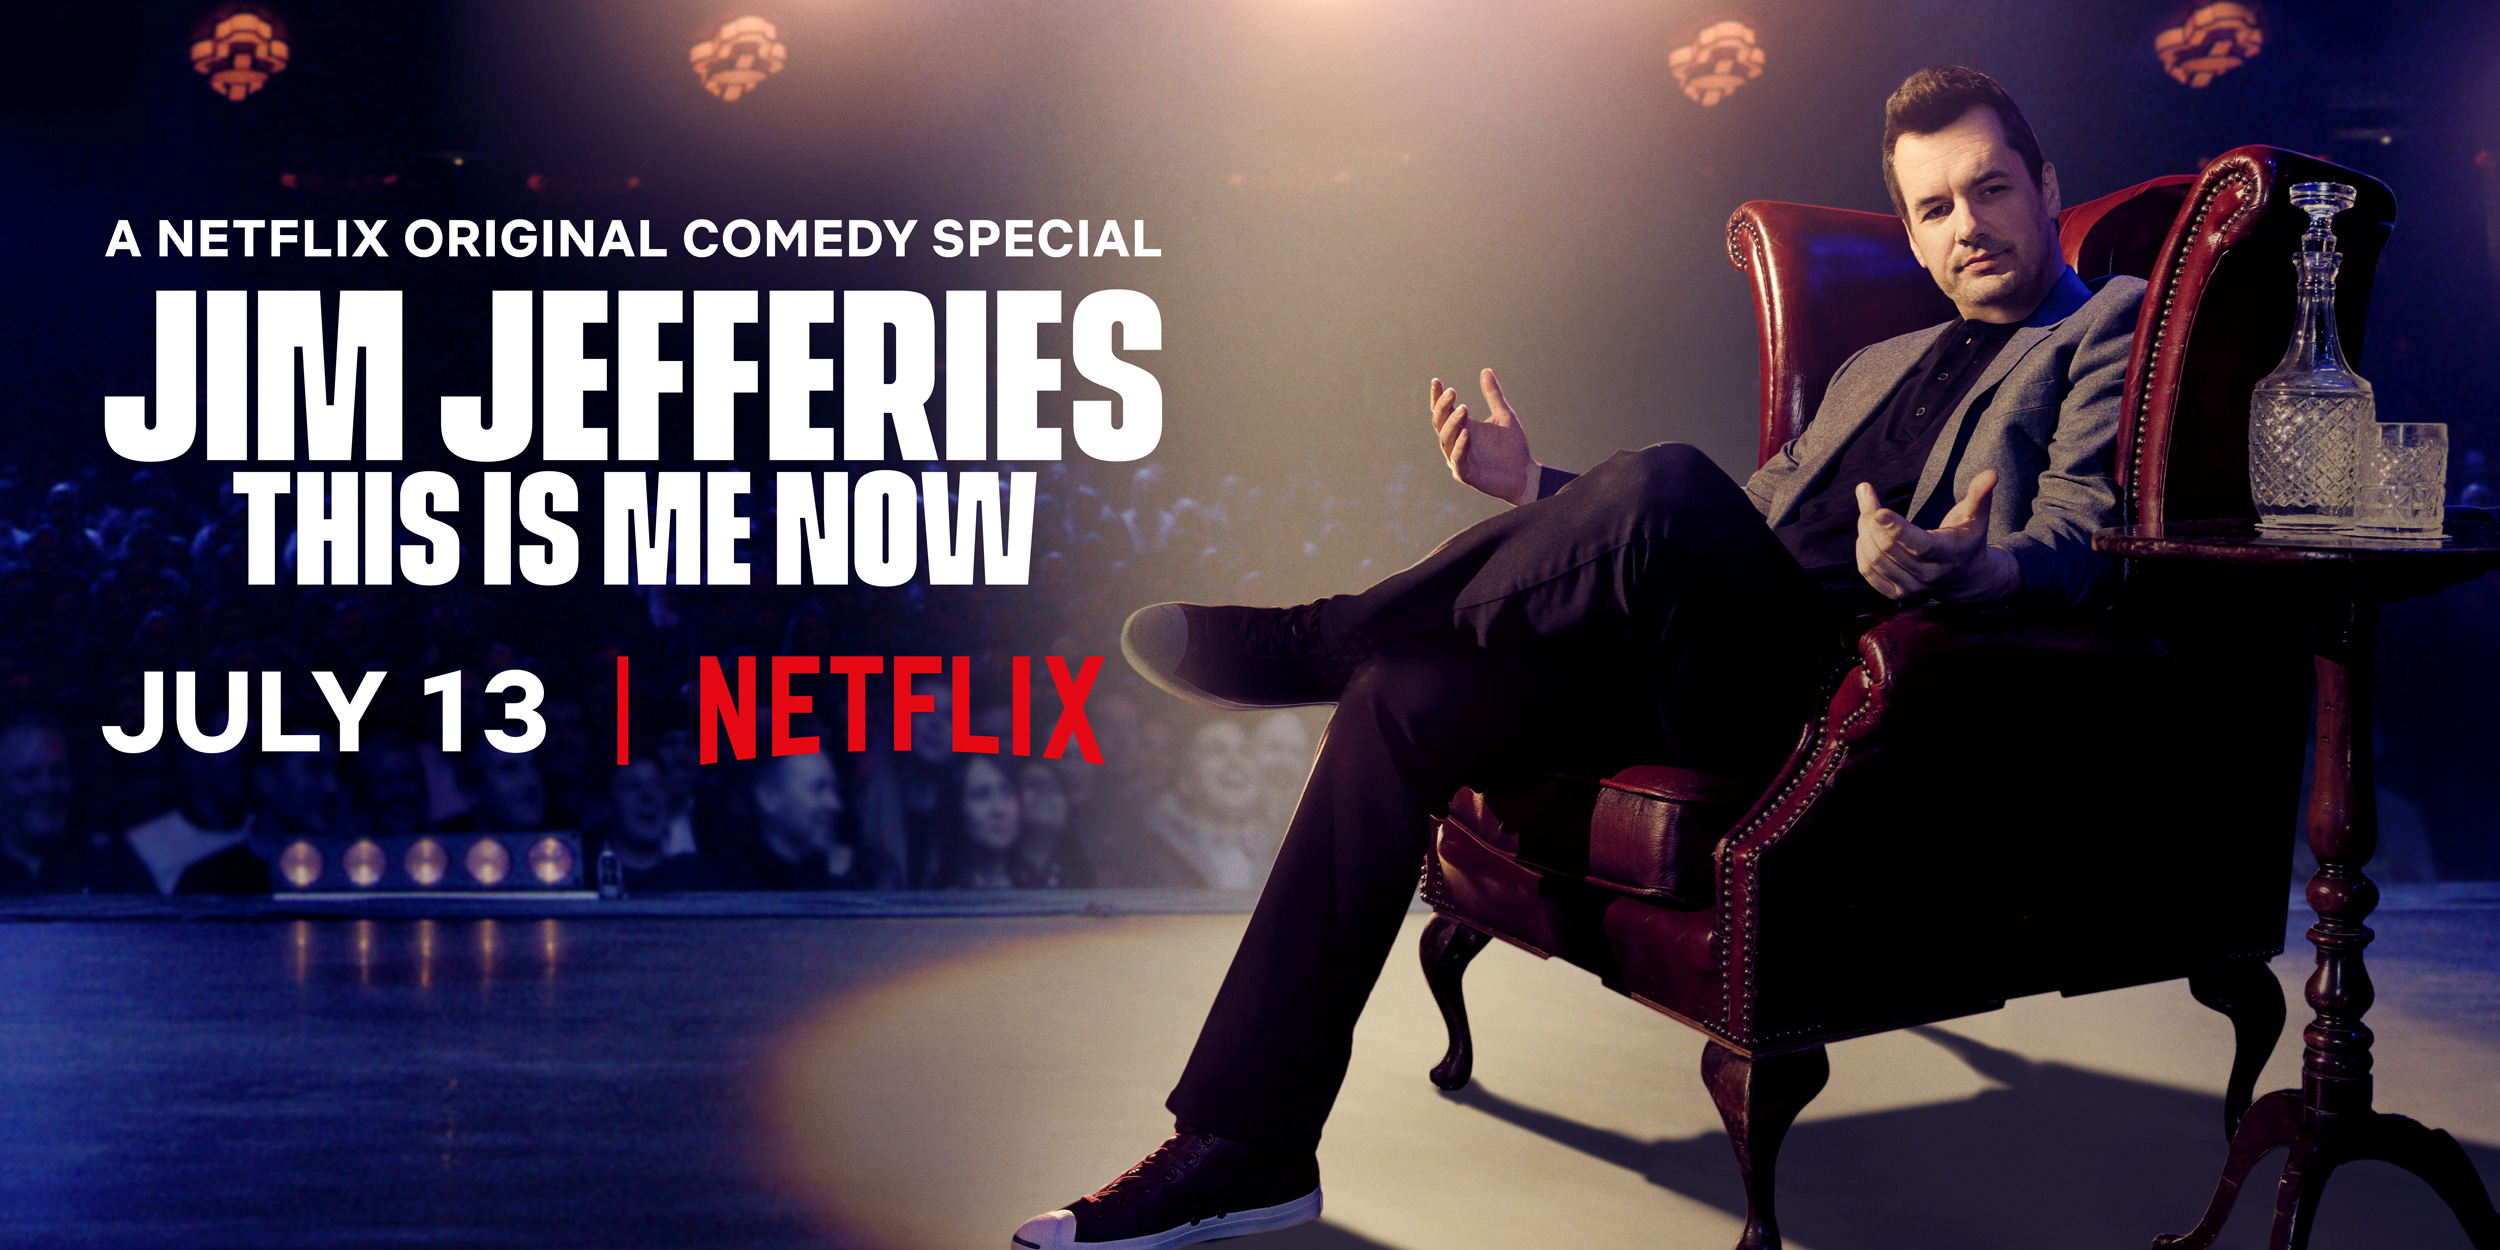 Jim Jefferies returns on Netflix with "This Is Me Now" Ready Steady Cut